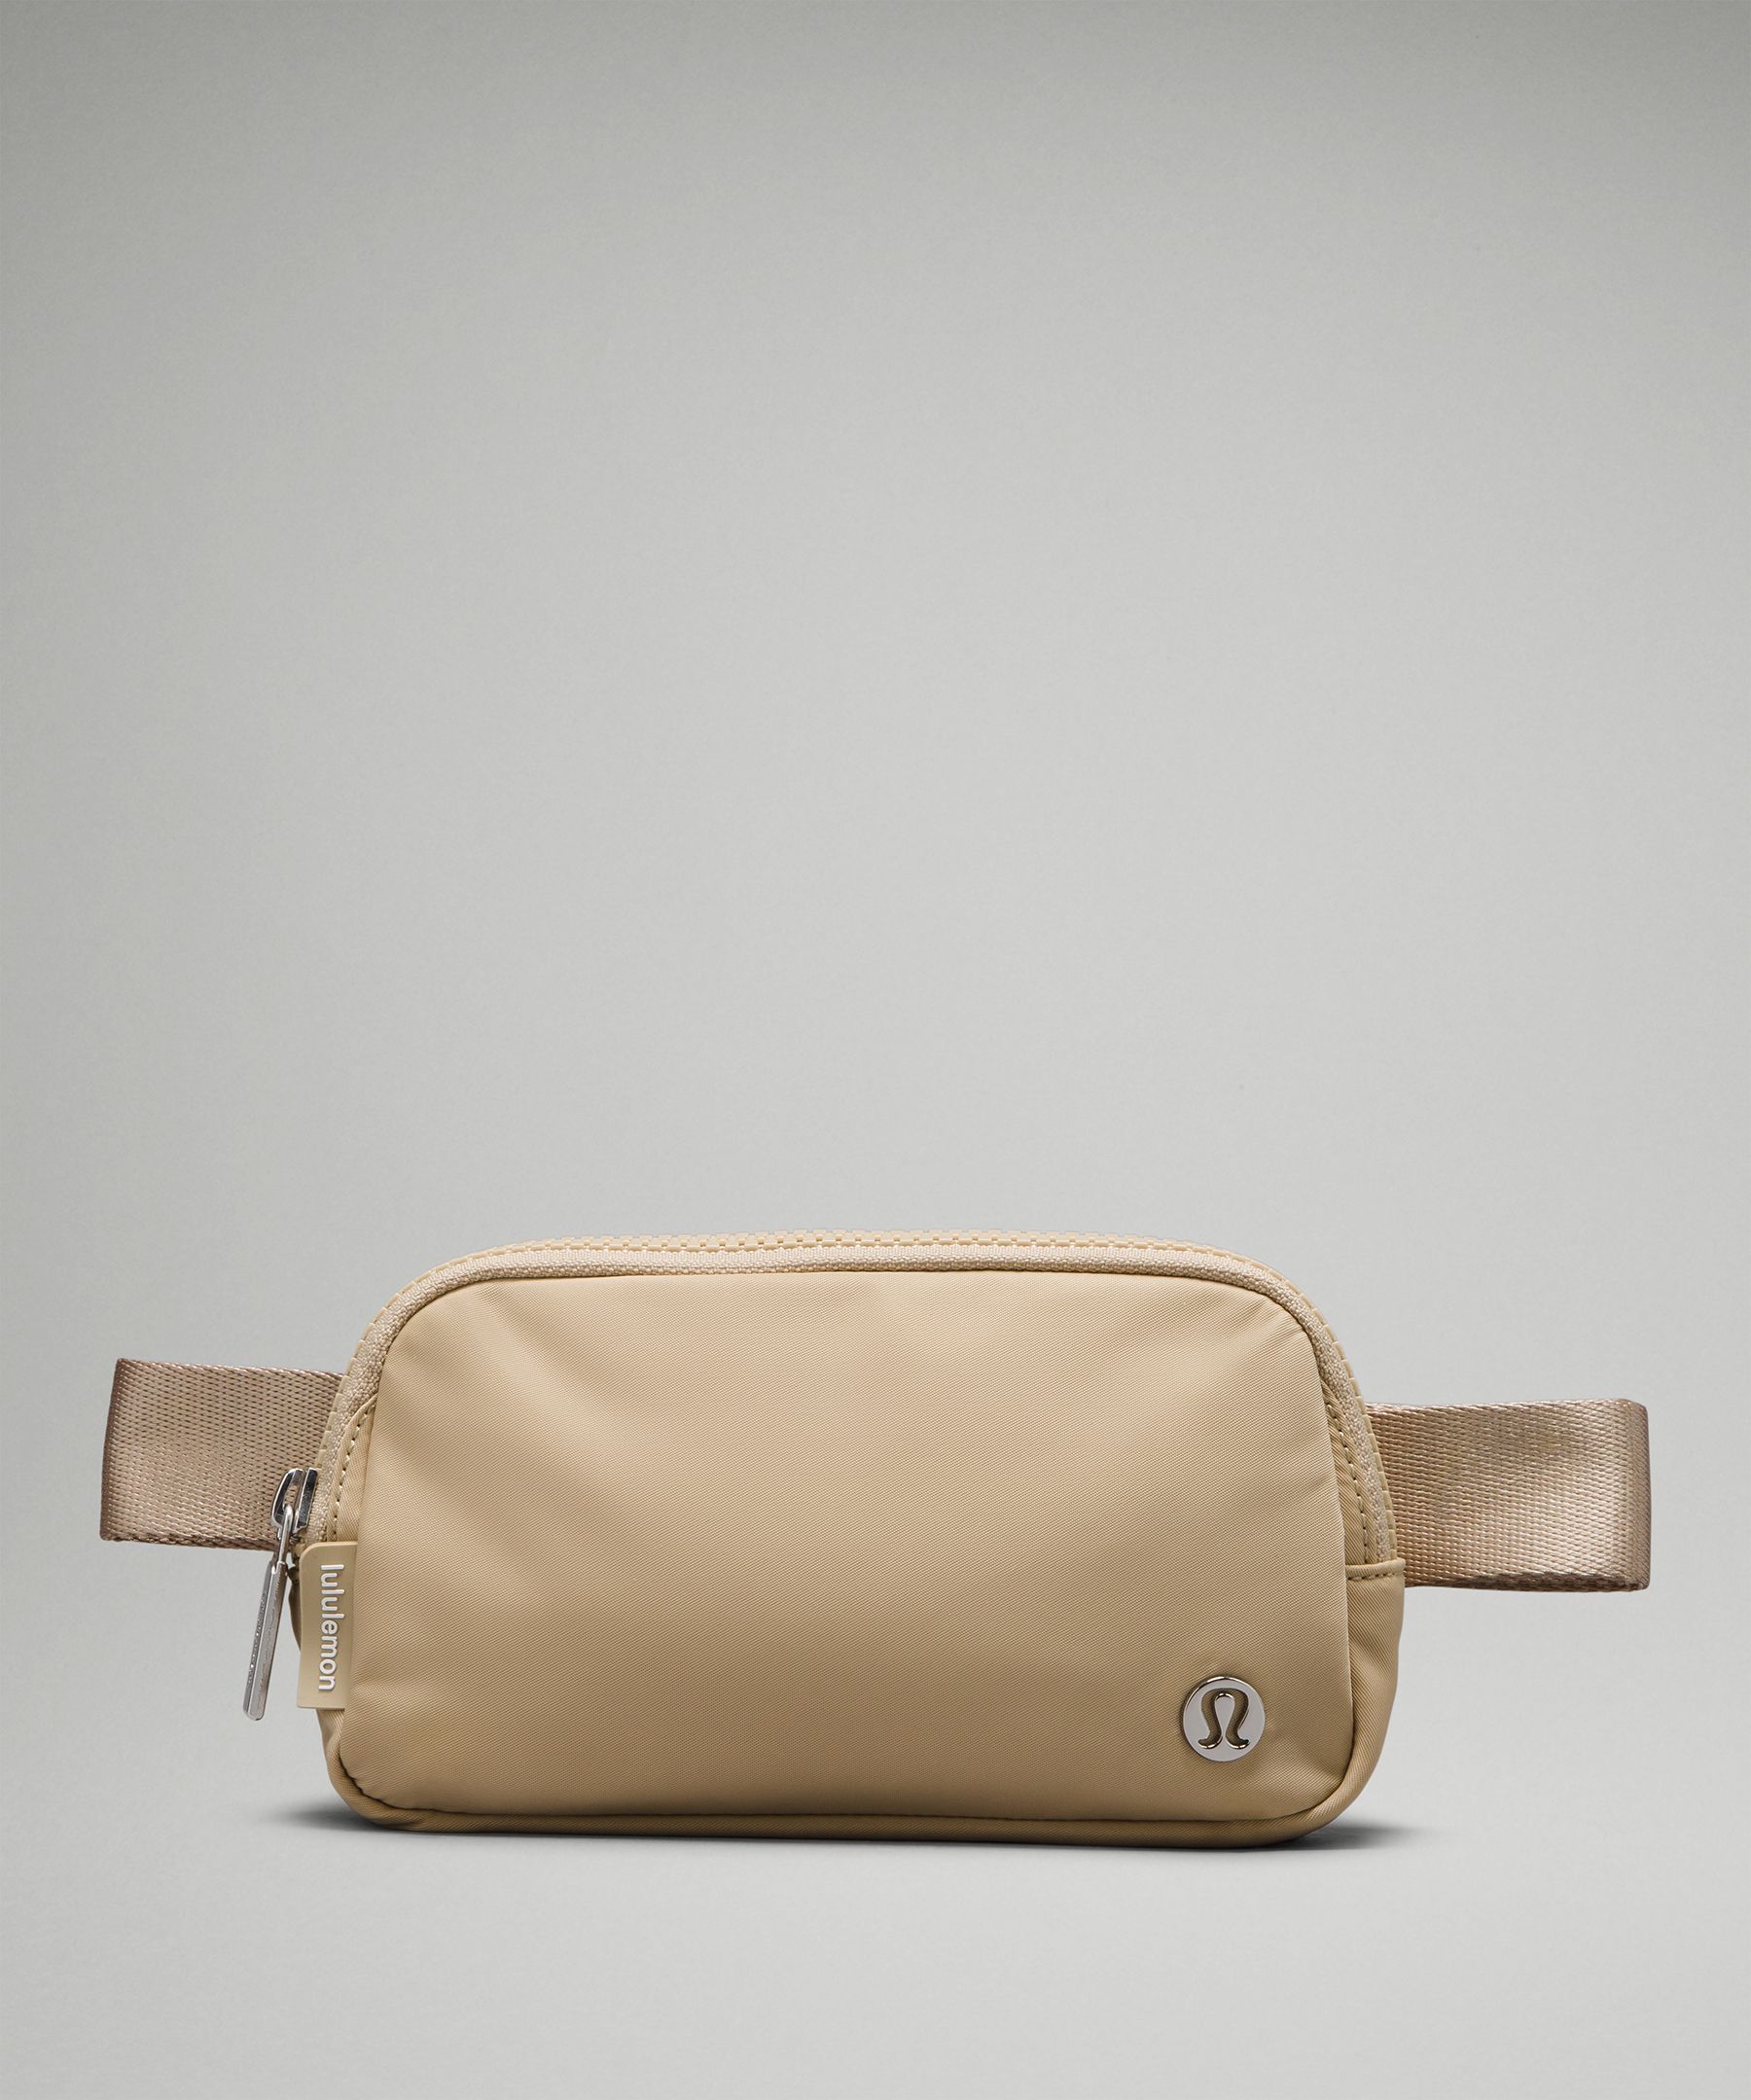 women bags best practice pack, women's bags, lululemon  Travel bag and  bring yoga mat too! Love this! fashion women bags